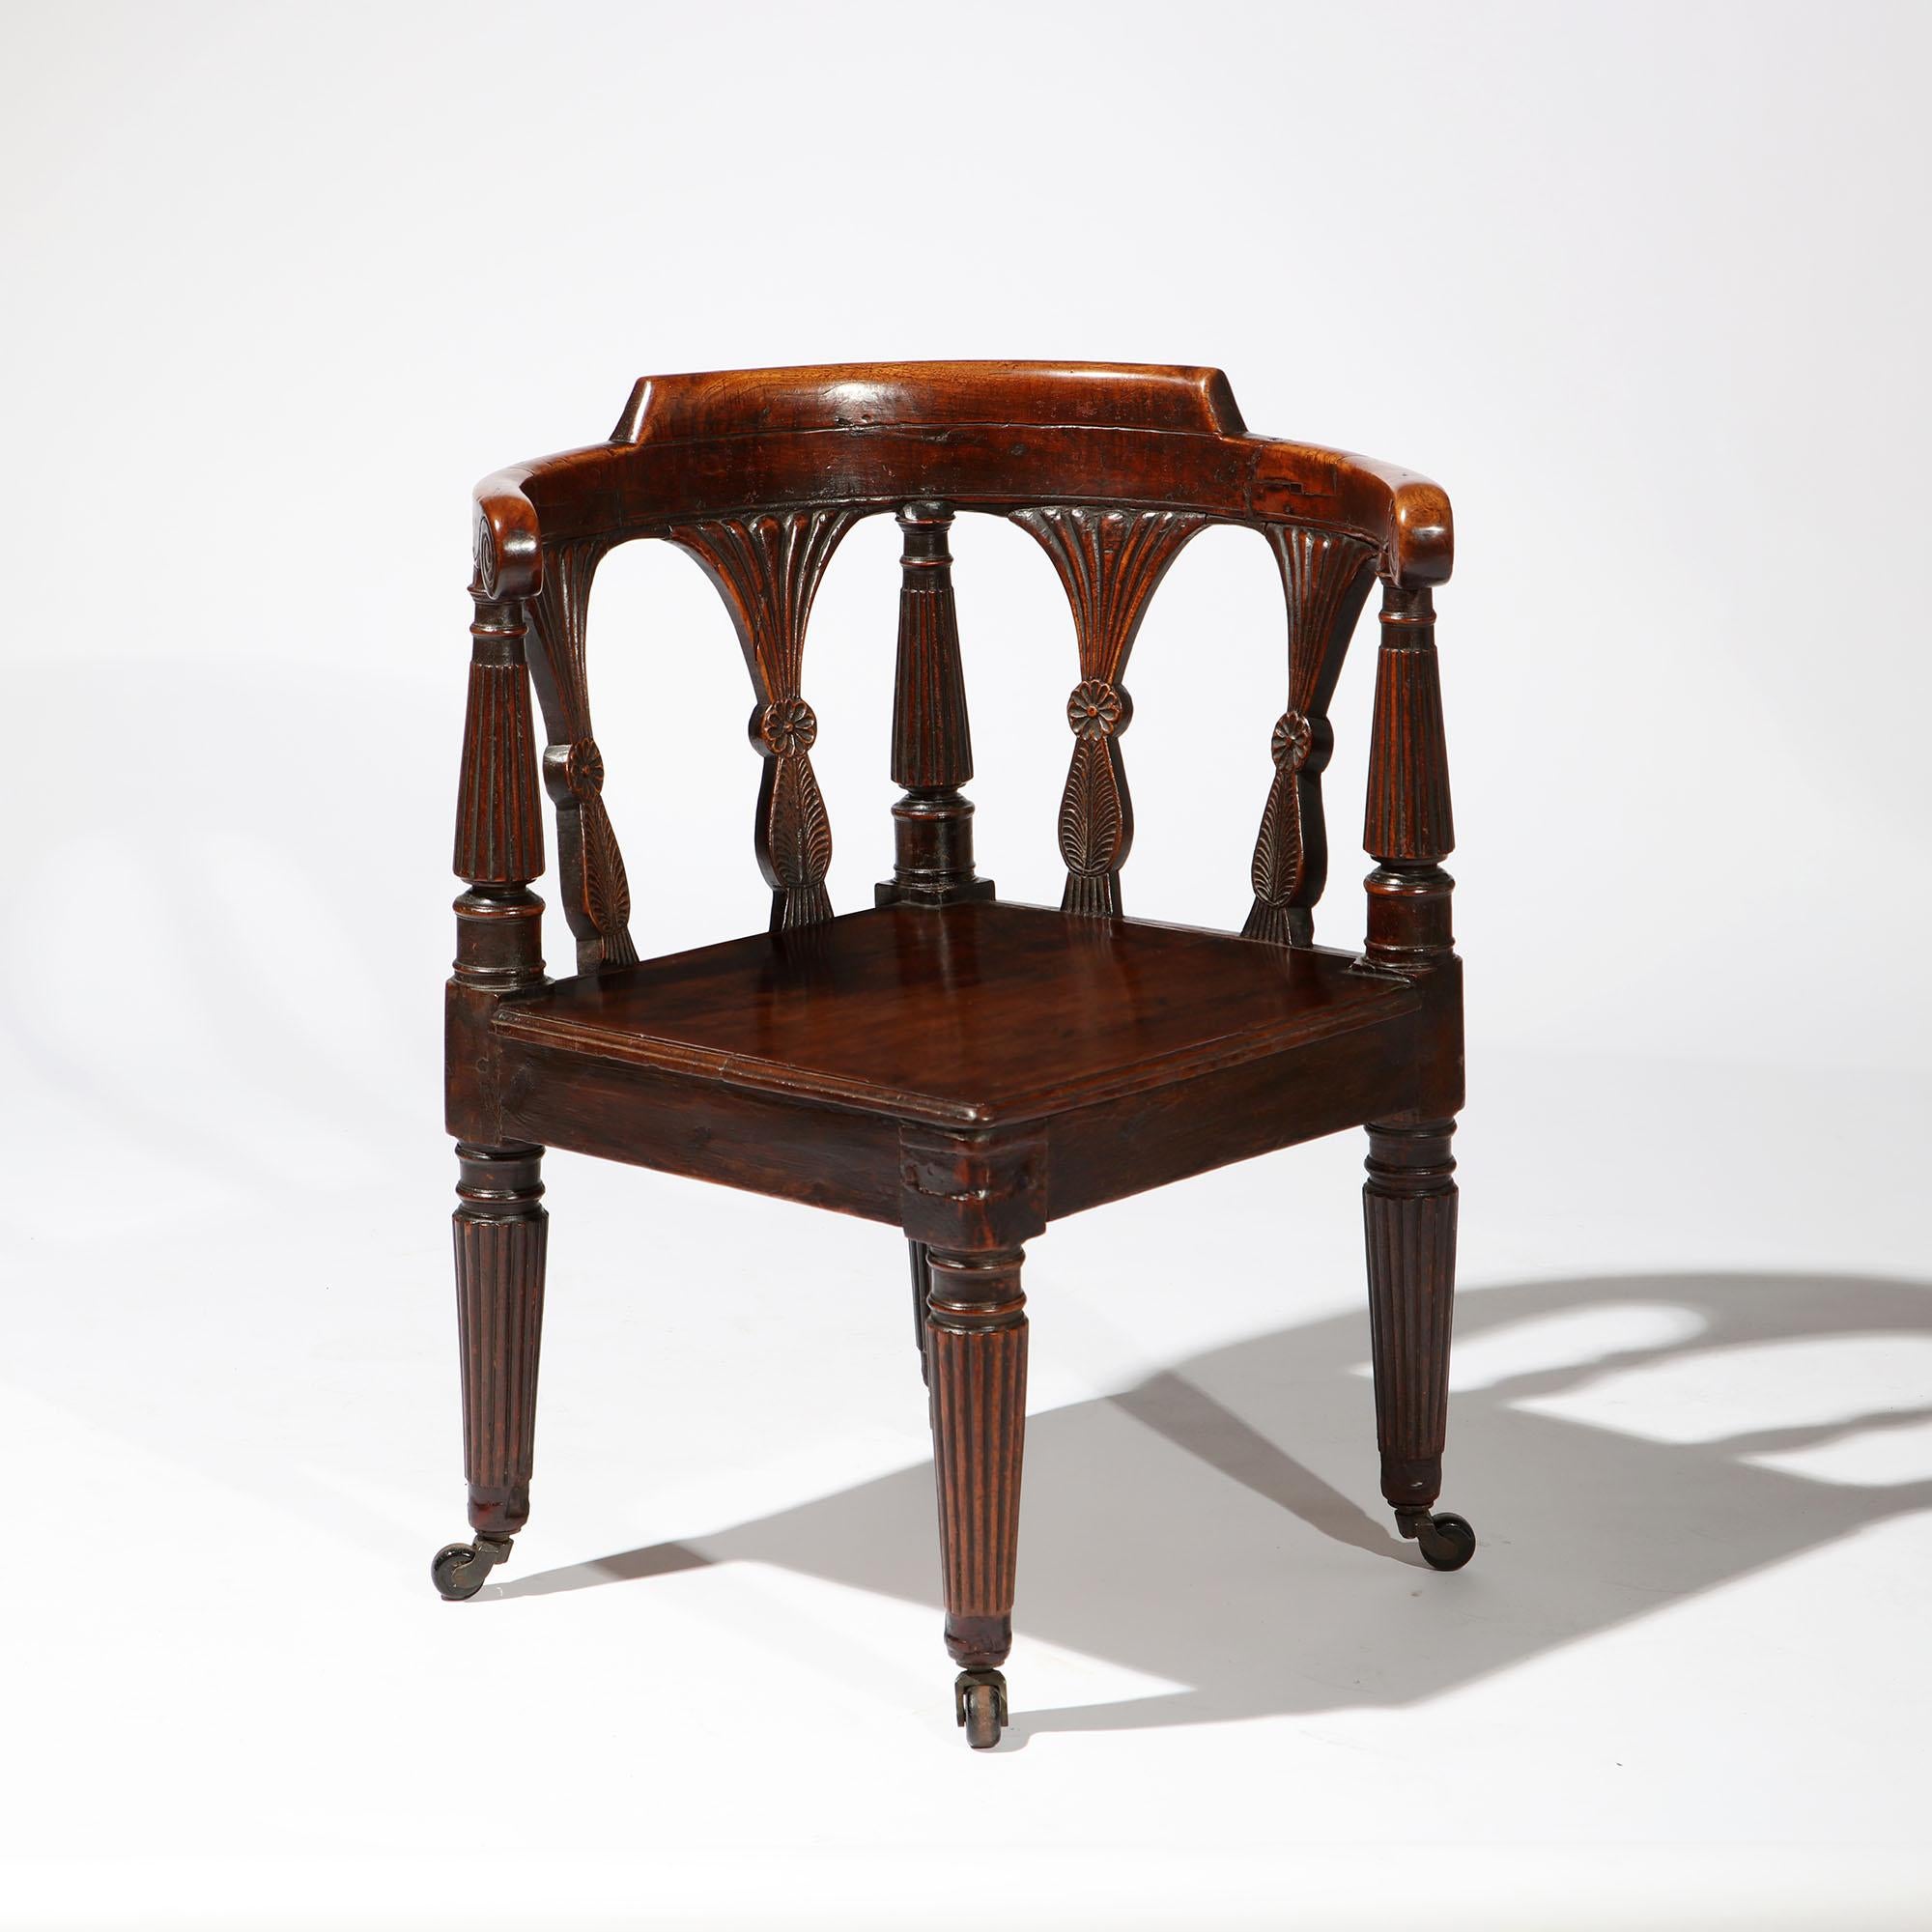 An early 19th century Anglo Indian corner chair in colonial hardwood, with curved back and back splats carved with paterae, with fluted legs terminating in brass castors.